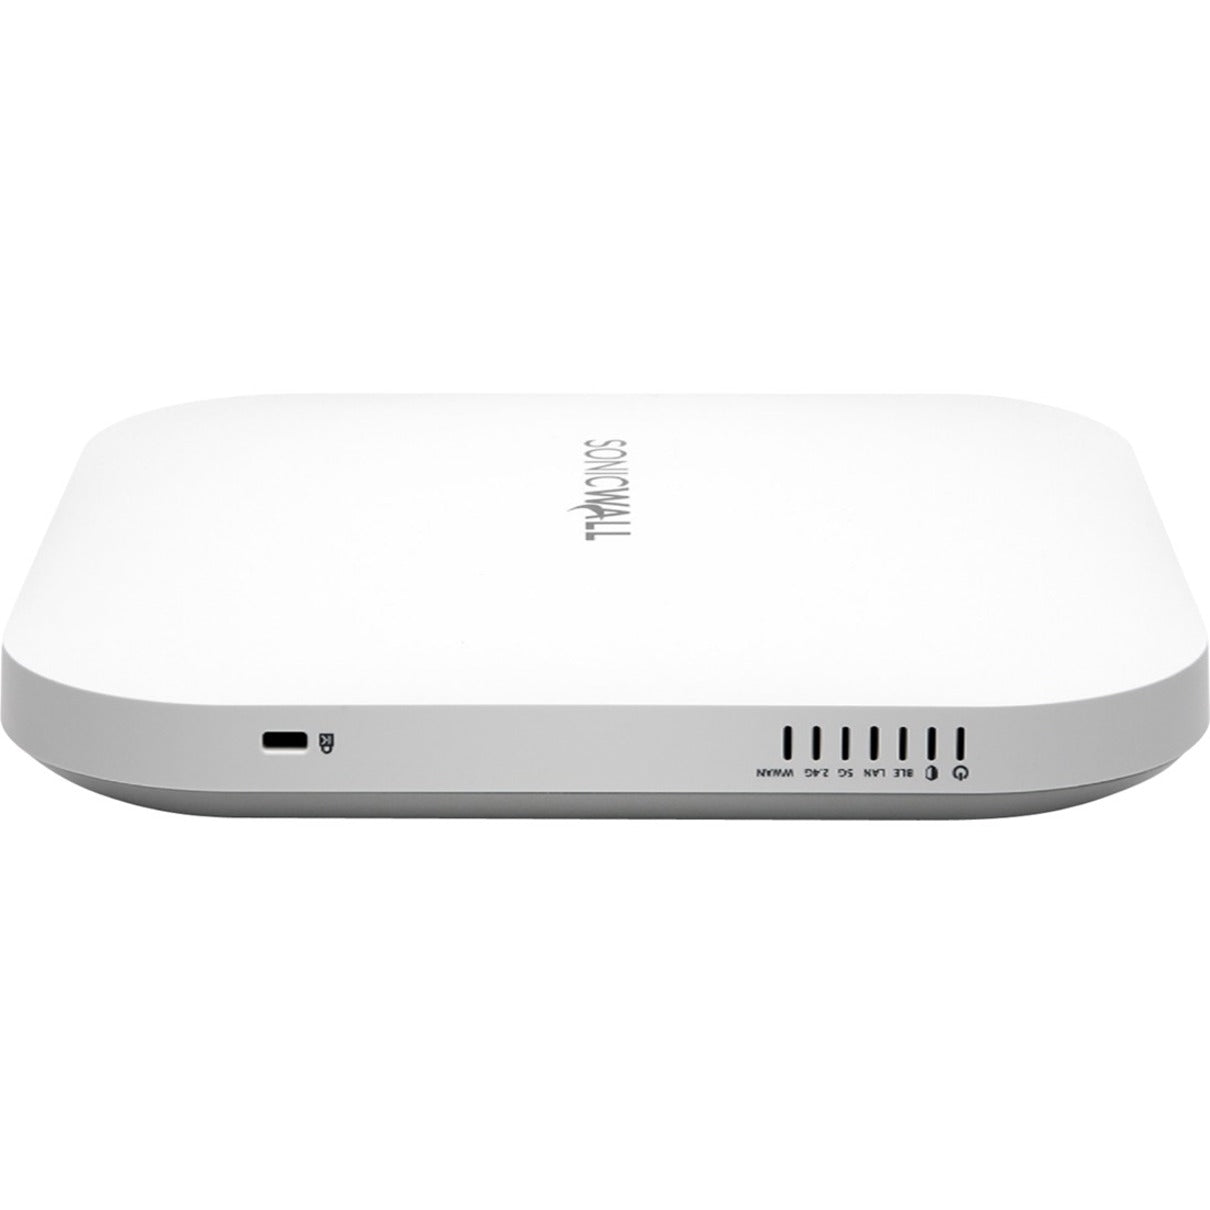 SonicWall 03-SSC-0348 SonicWave 641 Wireless Access Point, Advanced Secure Wireless Network Management and Support 1YR